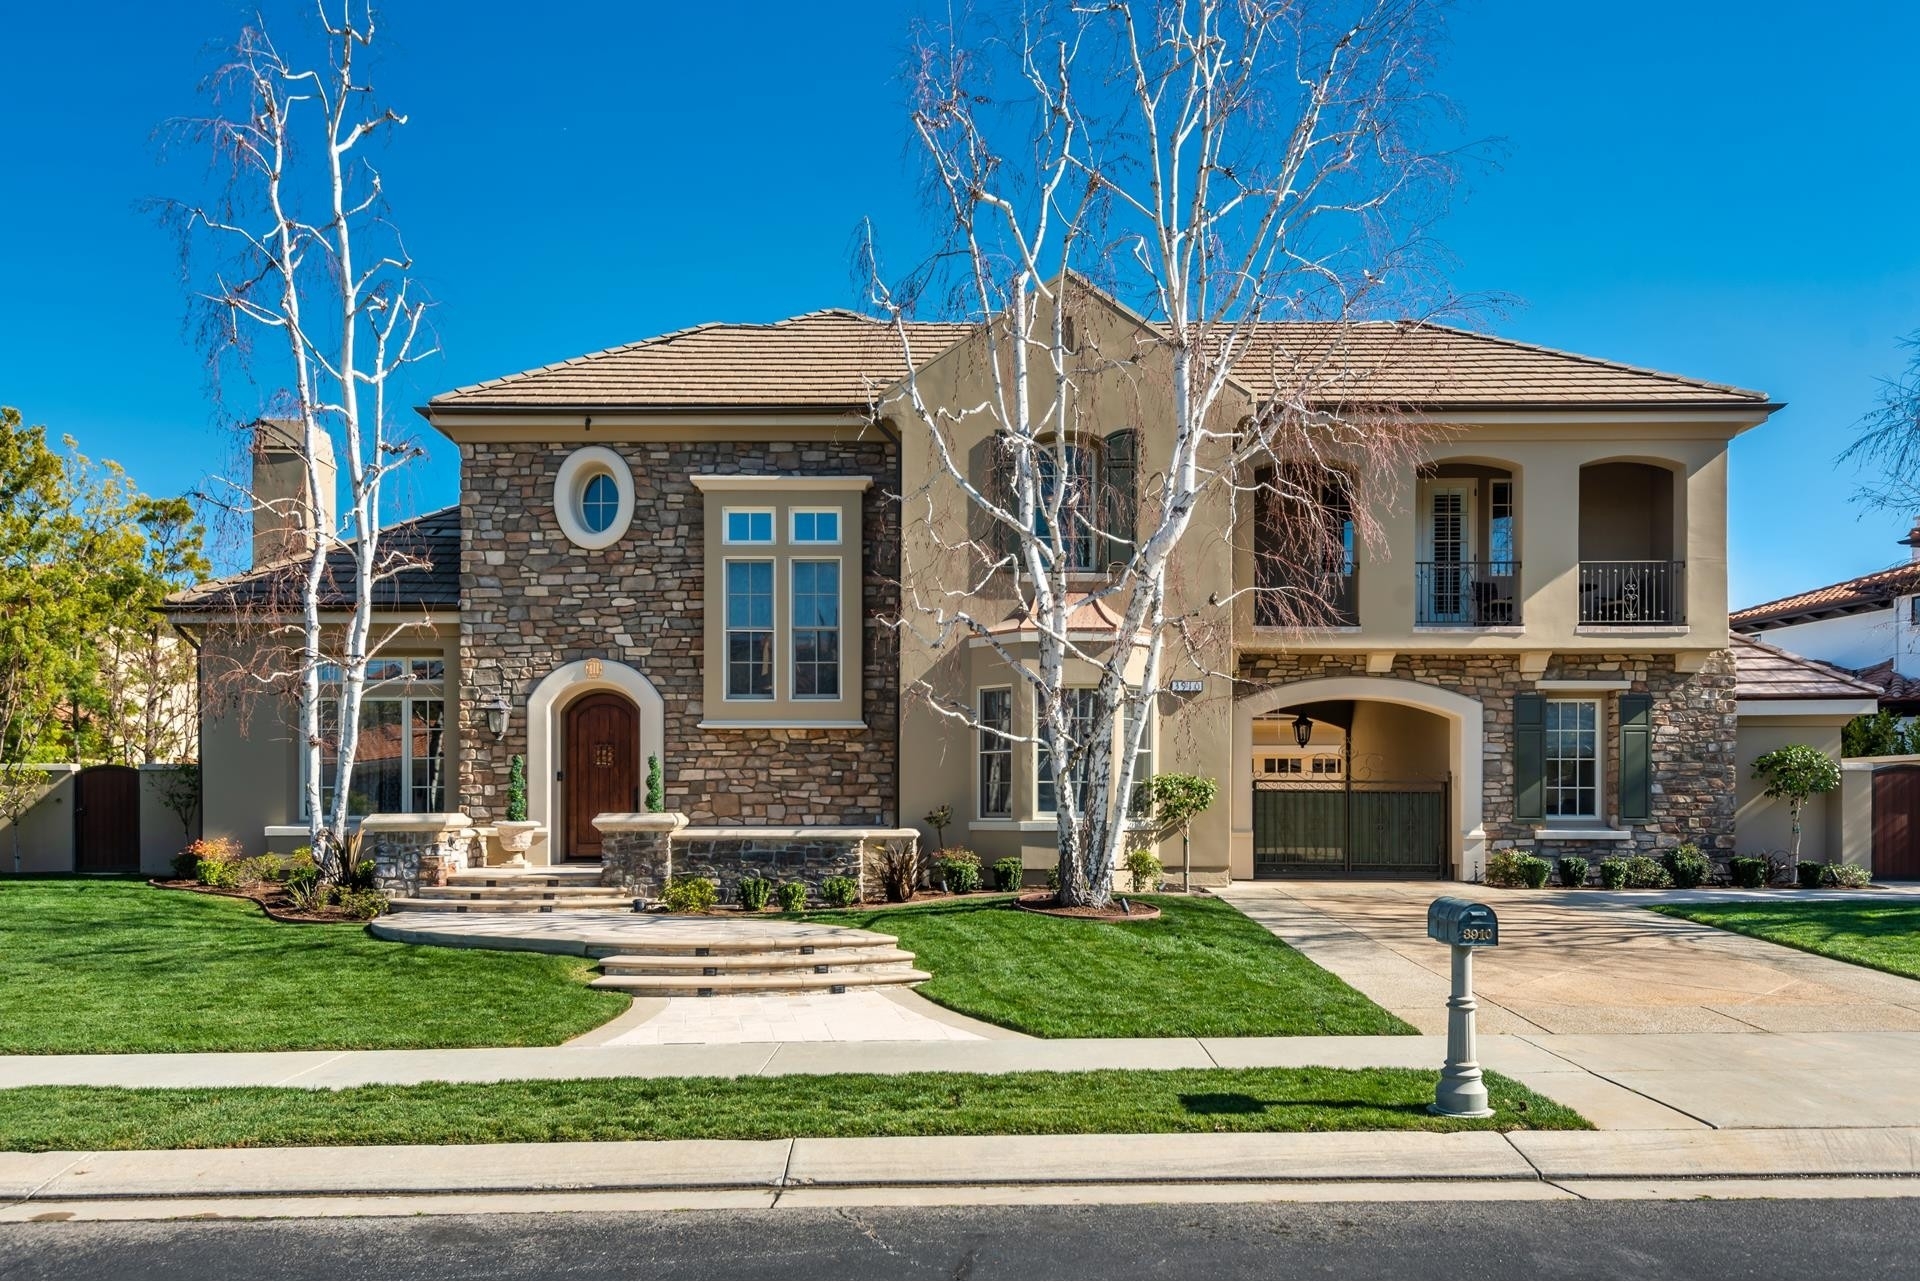 Single Family Home for Sale at The Oaks, Calabasas, CA 91302